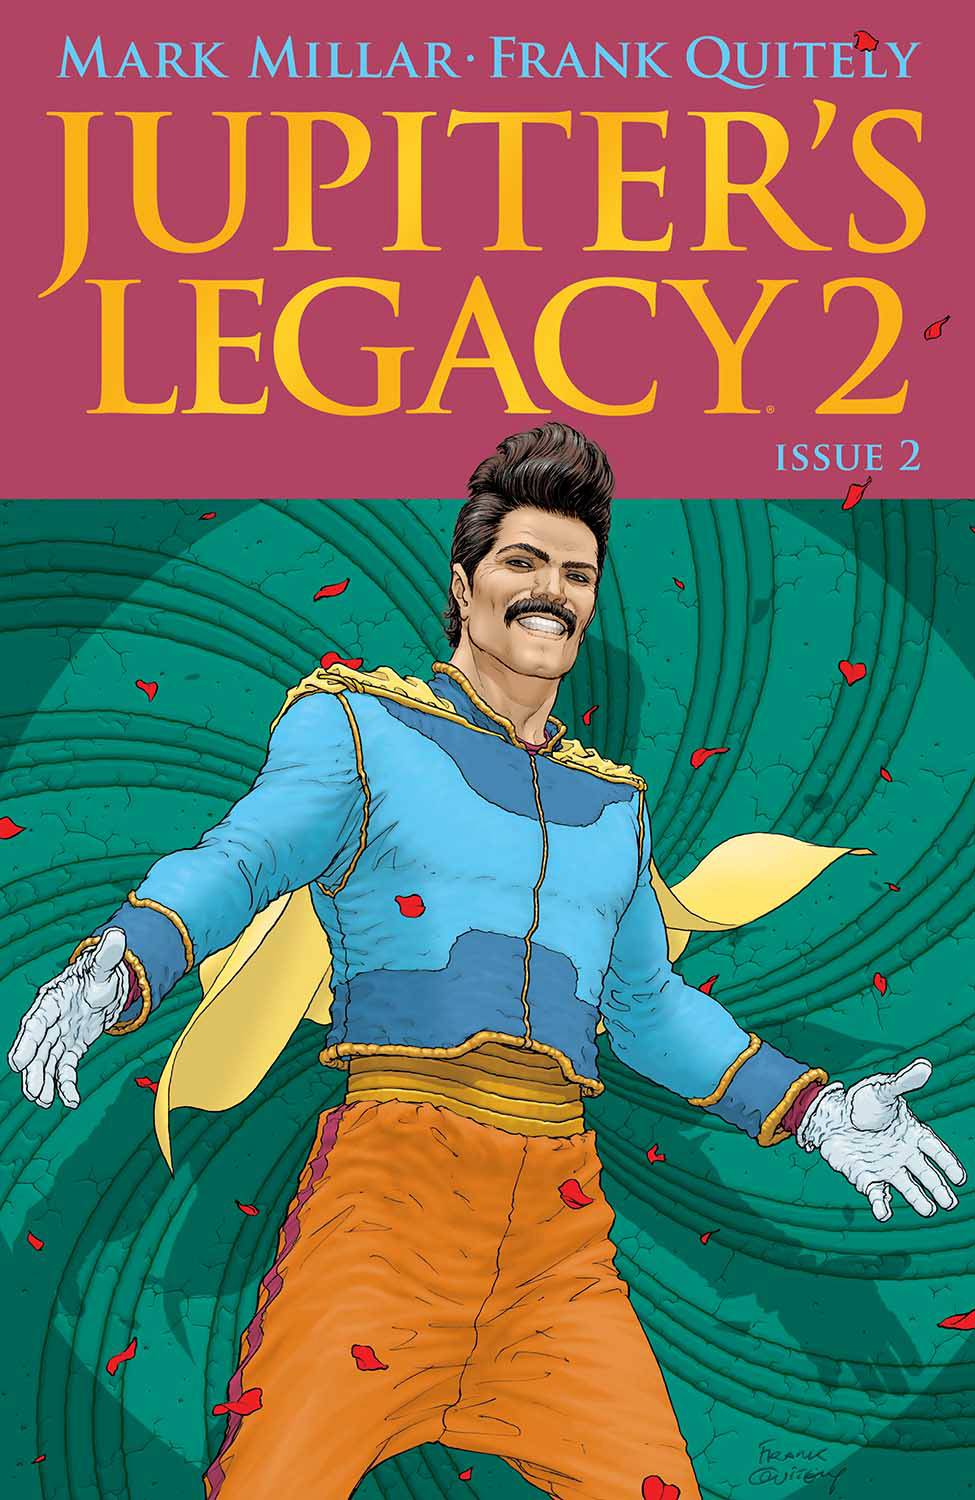 Jupiters Legacy Volume 2 #2 Cover A Quitely